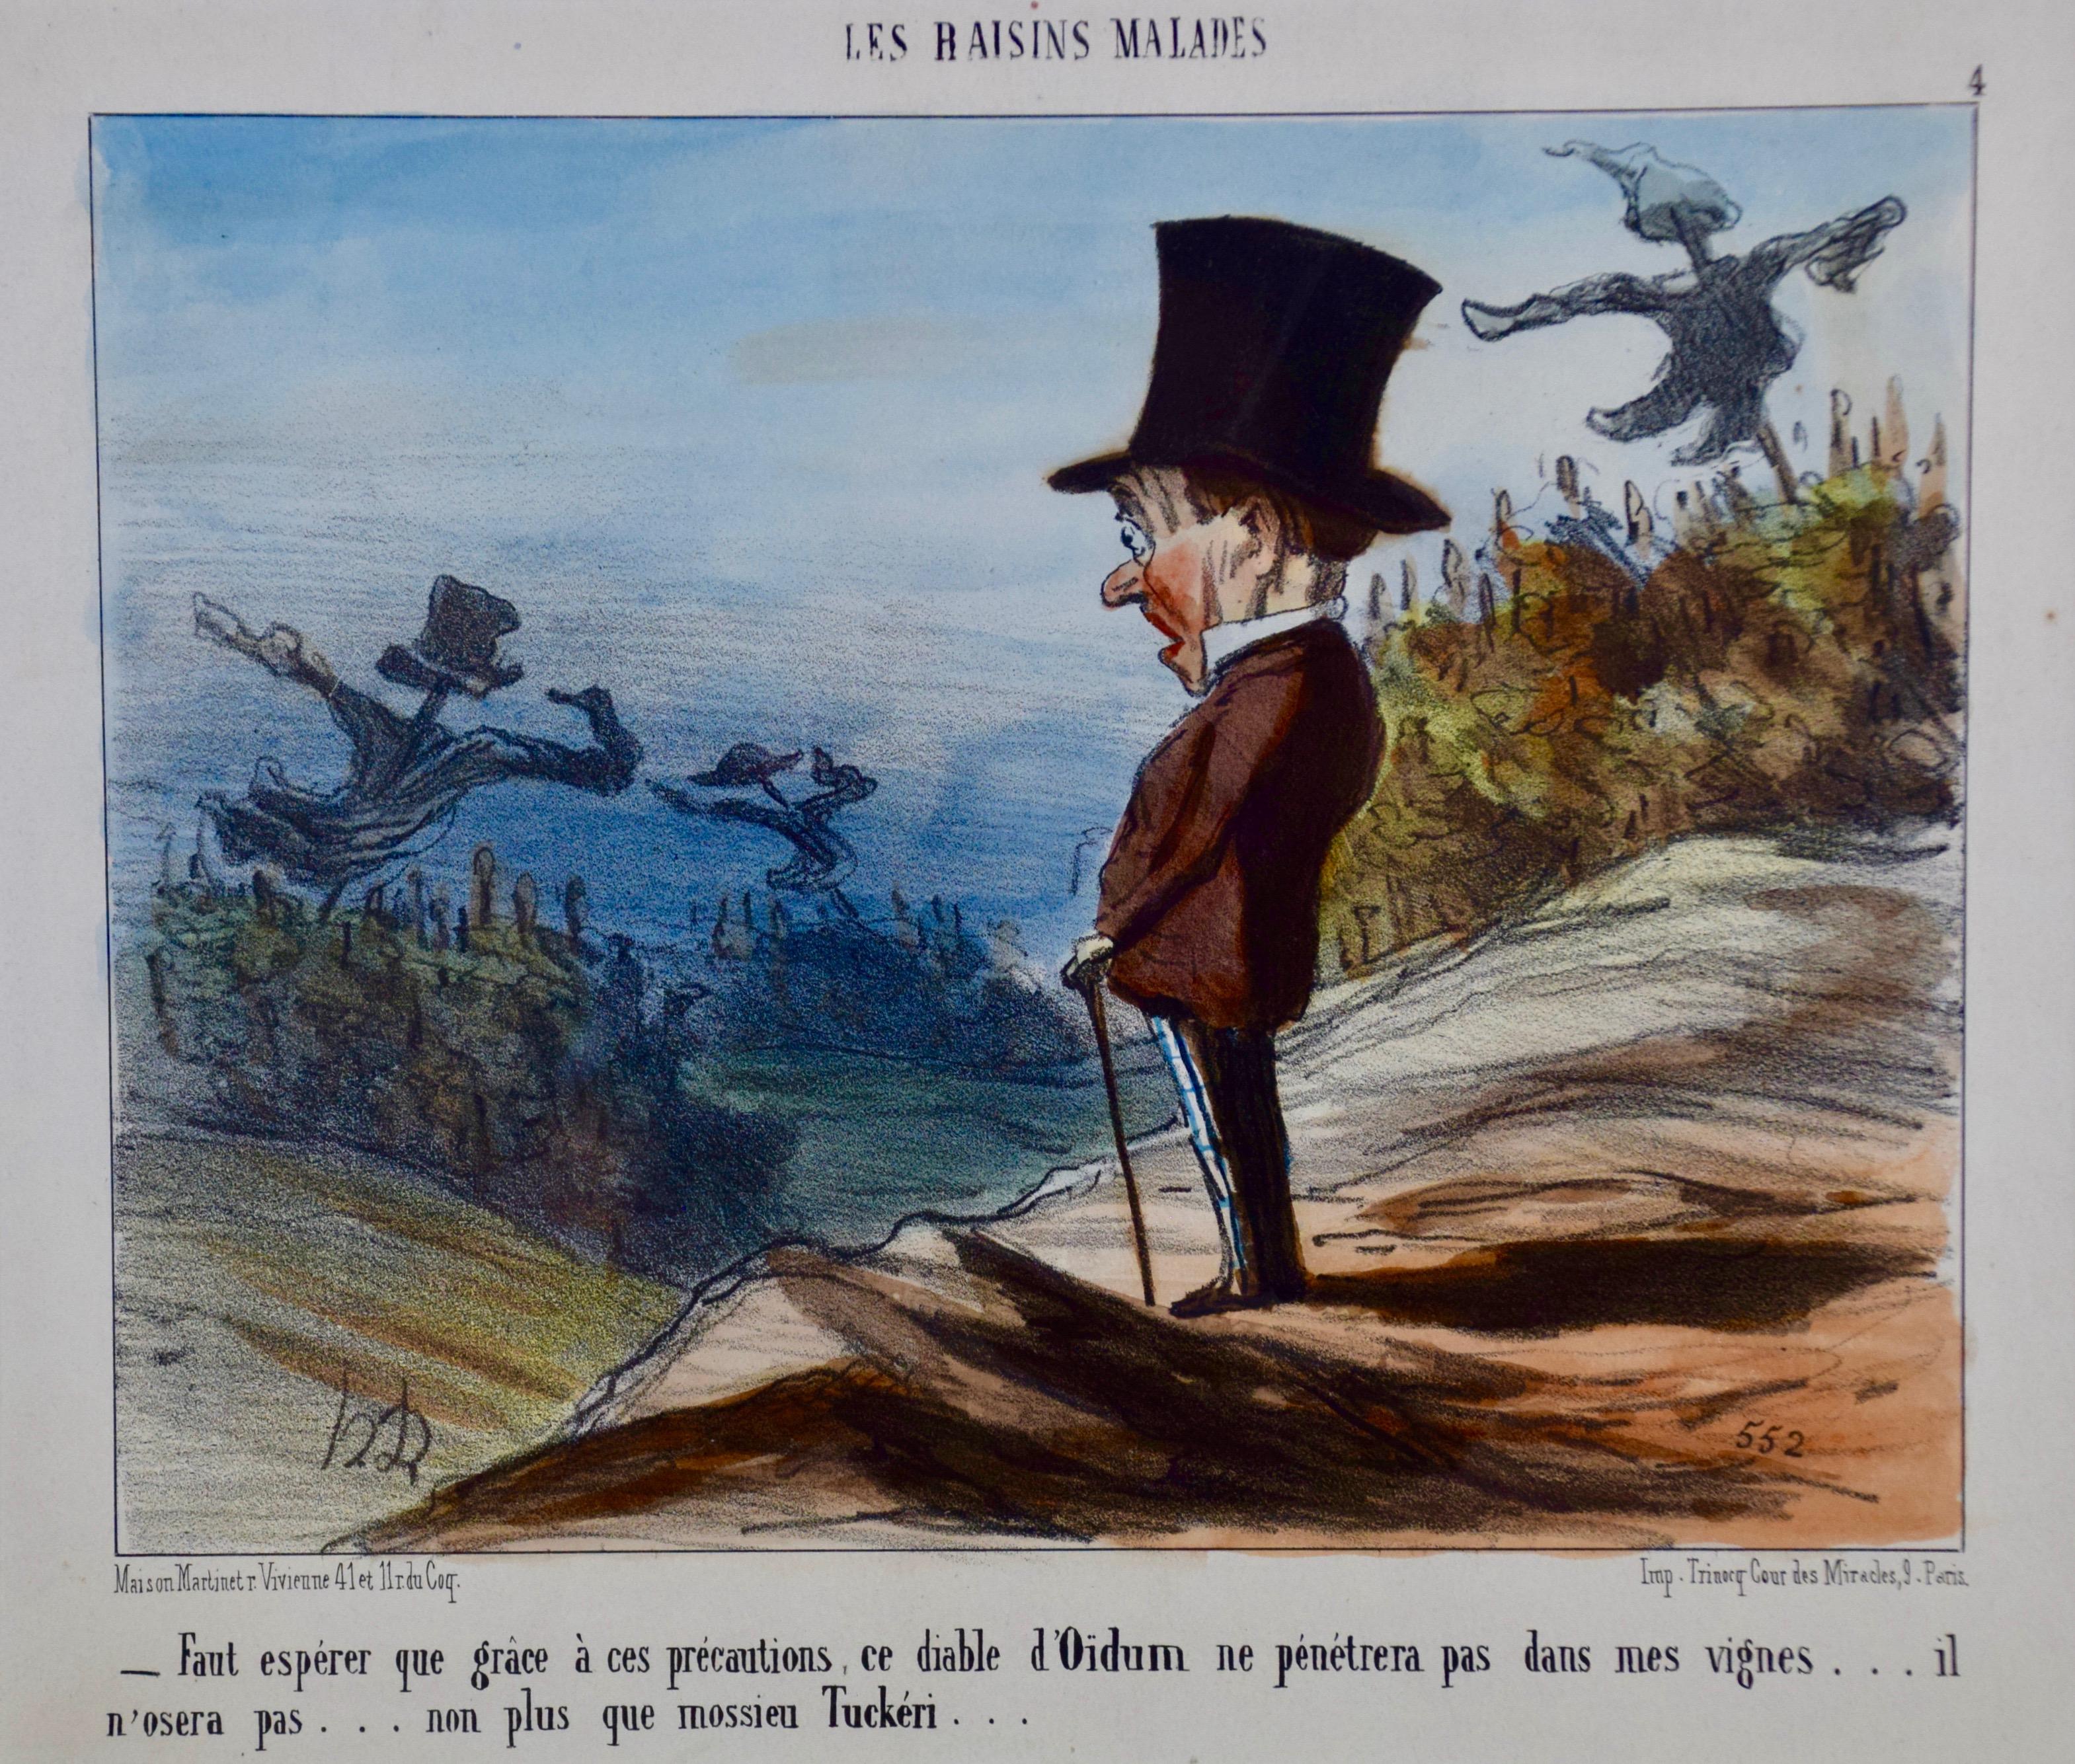 Daumier Colored Lithographic Satire of a Man Concerned for His Vineyard and Wine - Print by Honoré Daumier